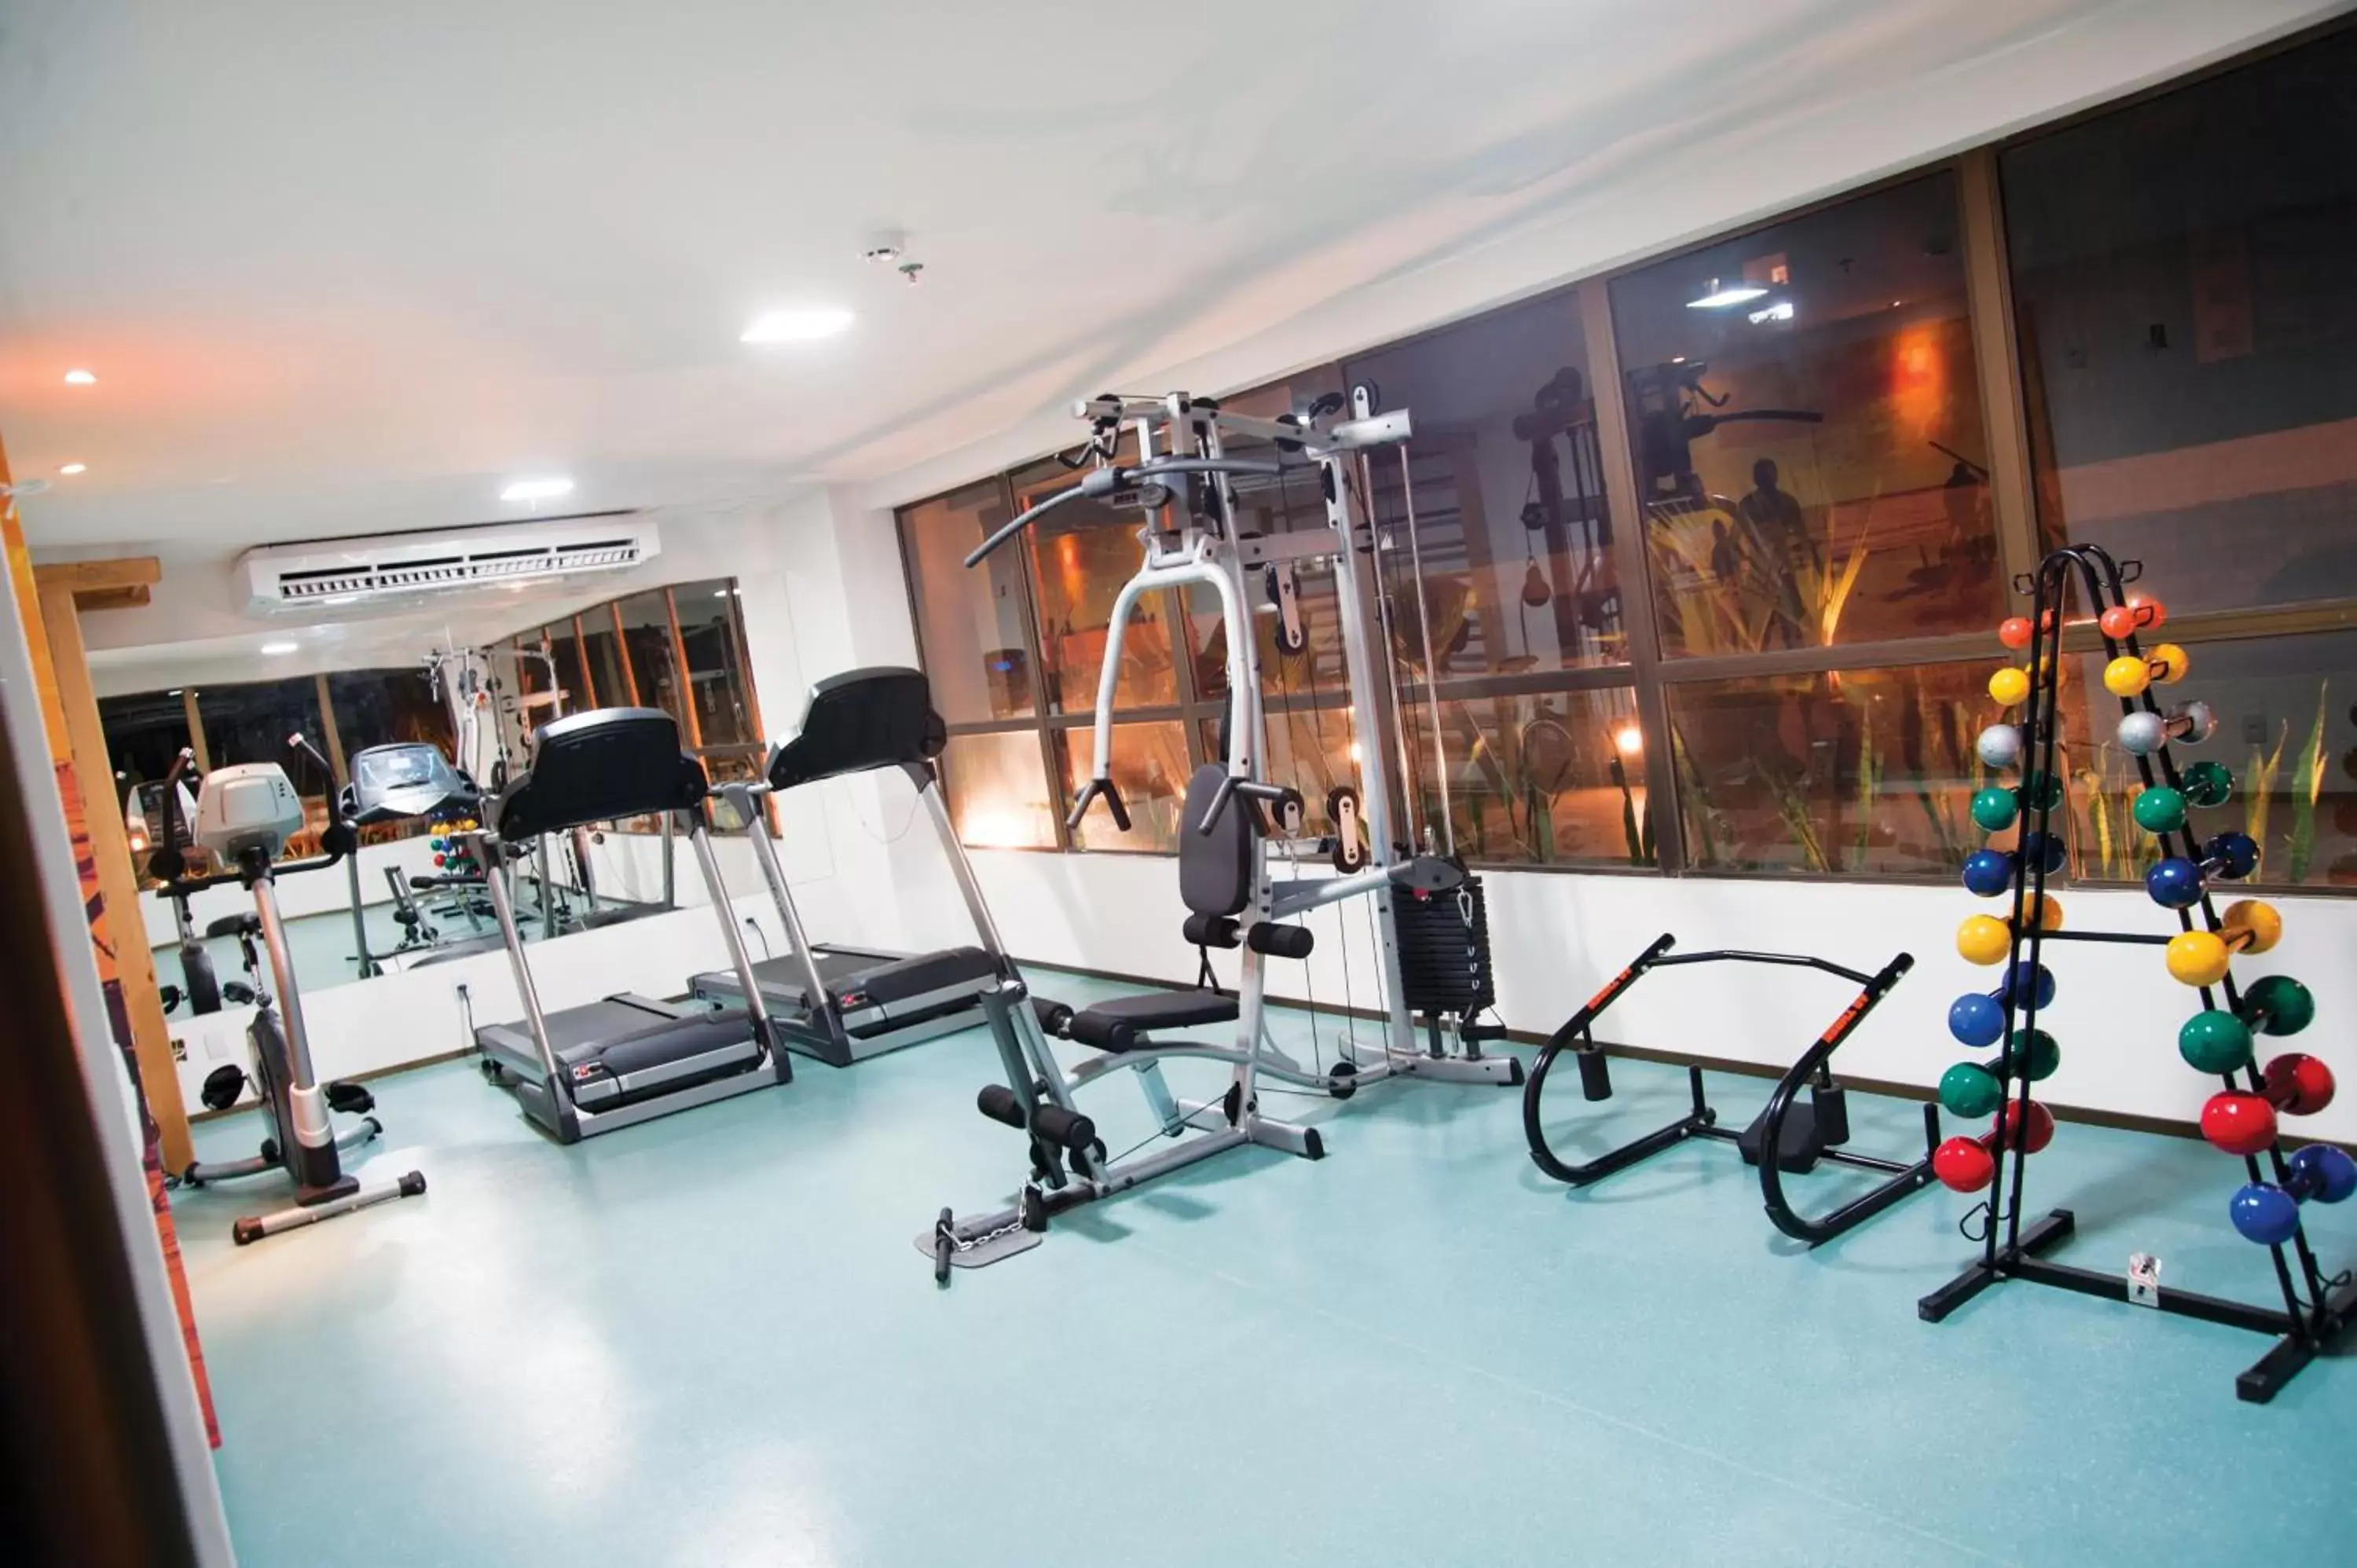 Fitness centre/facilities, Fitness Center/Facilities in Ritz Suites Home Service